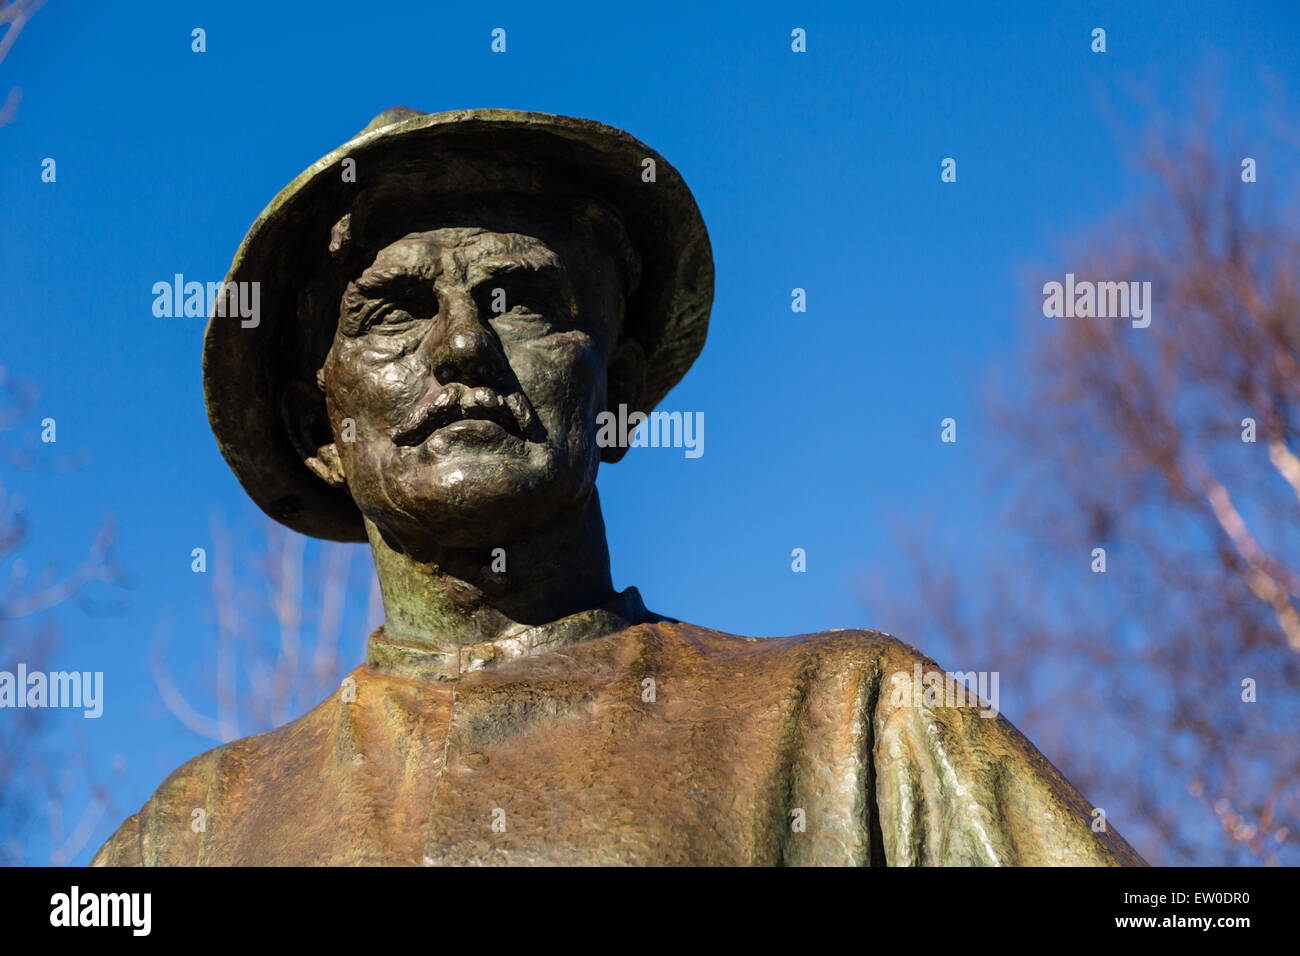 Statue of a railway worker in Gulbrandsons park, Narvik, Norway Stock Photo